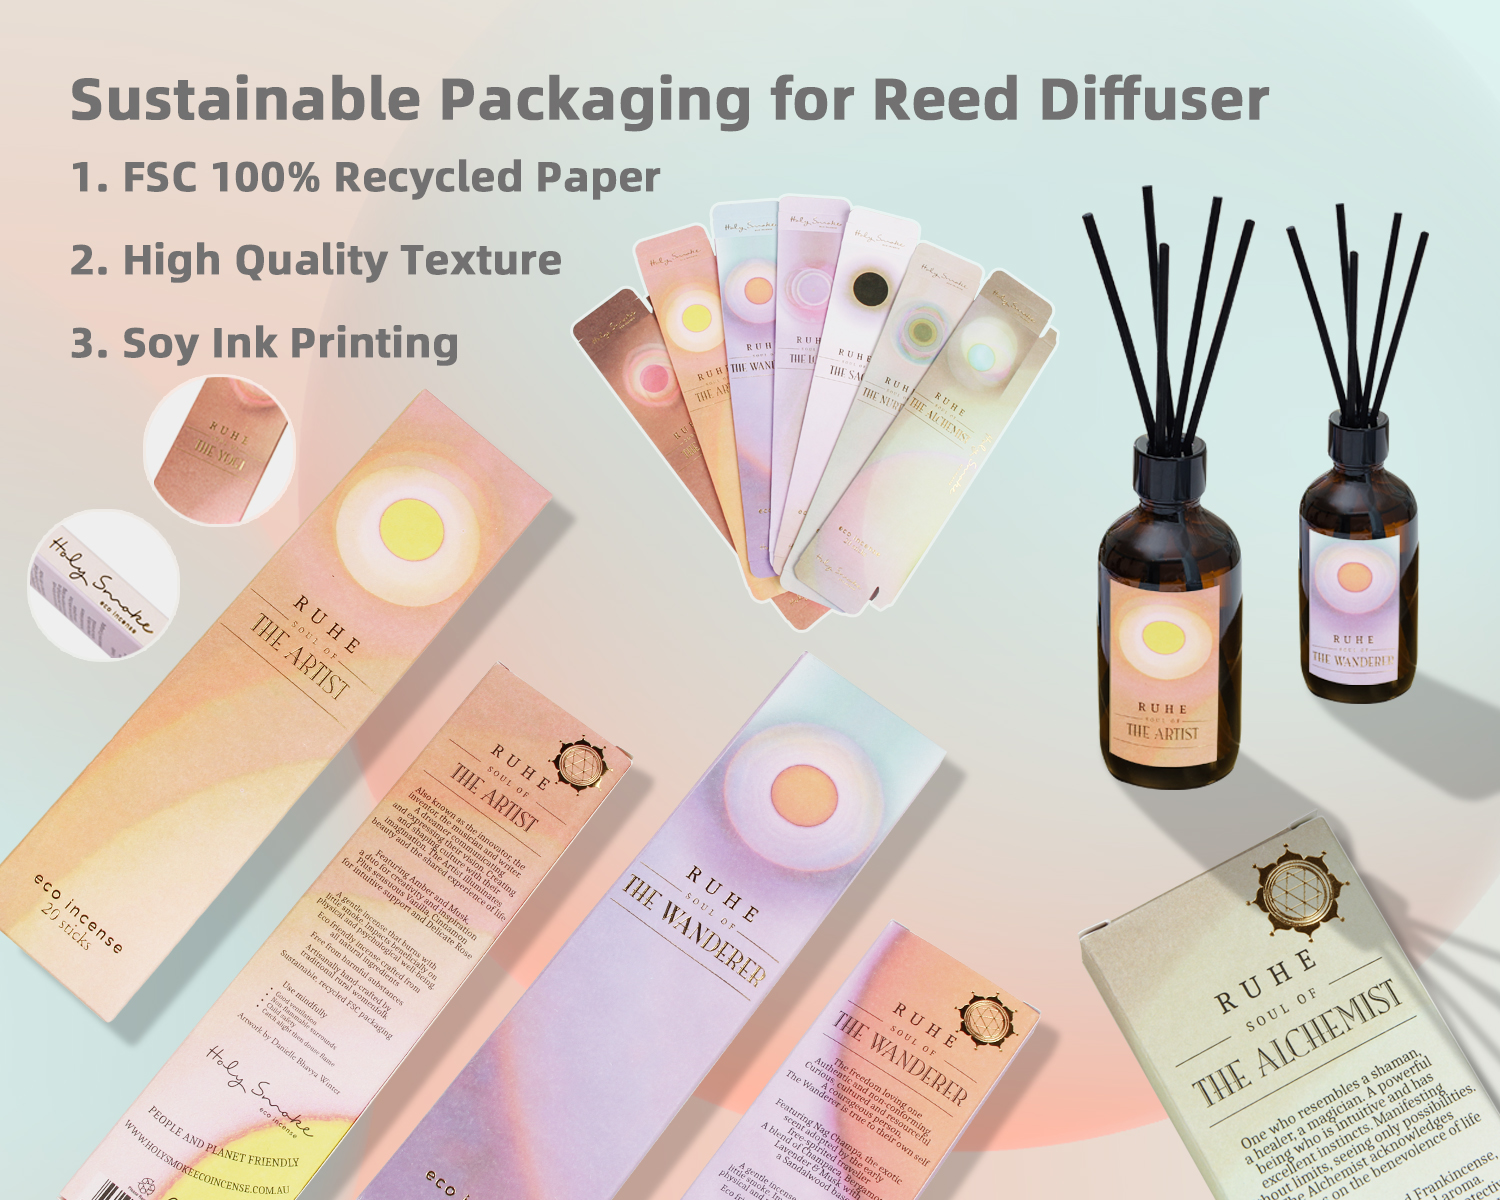 How to Create Sustainable Packaging Solutions for Reed Diffusers? SUN NATURE will tell you a perfect solution